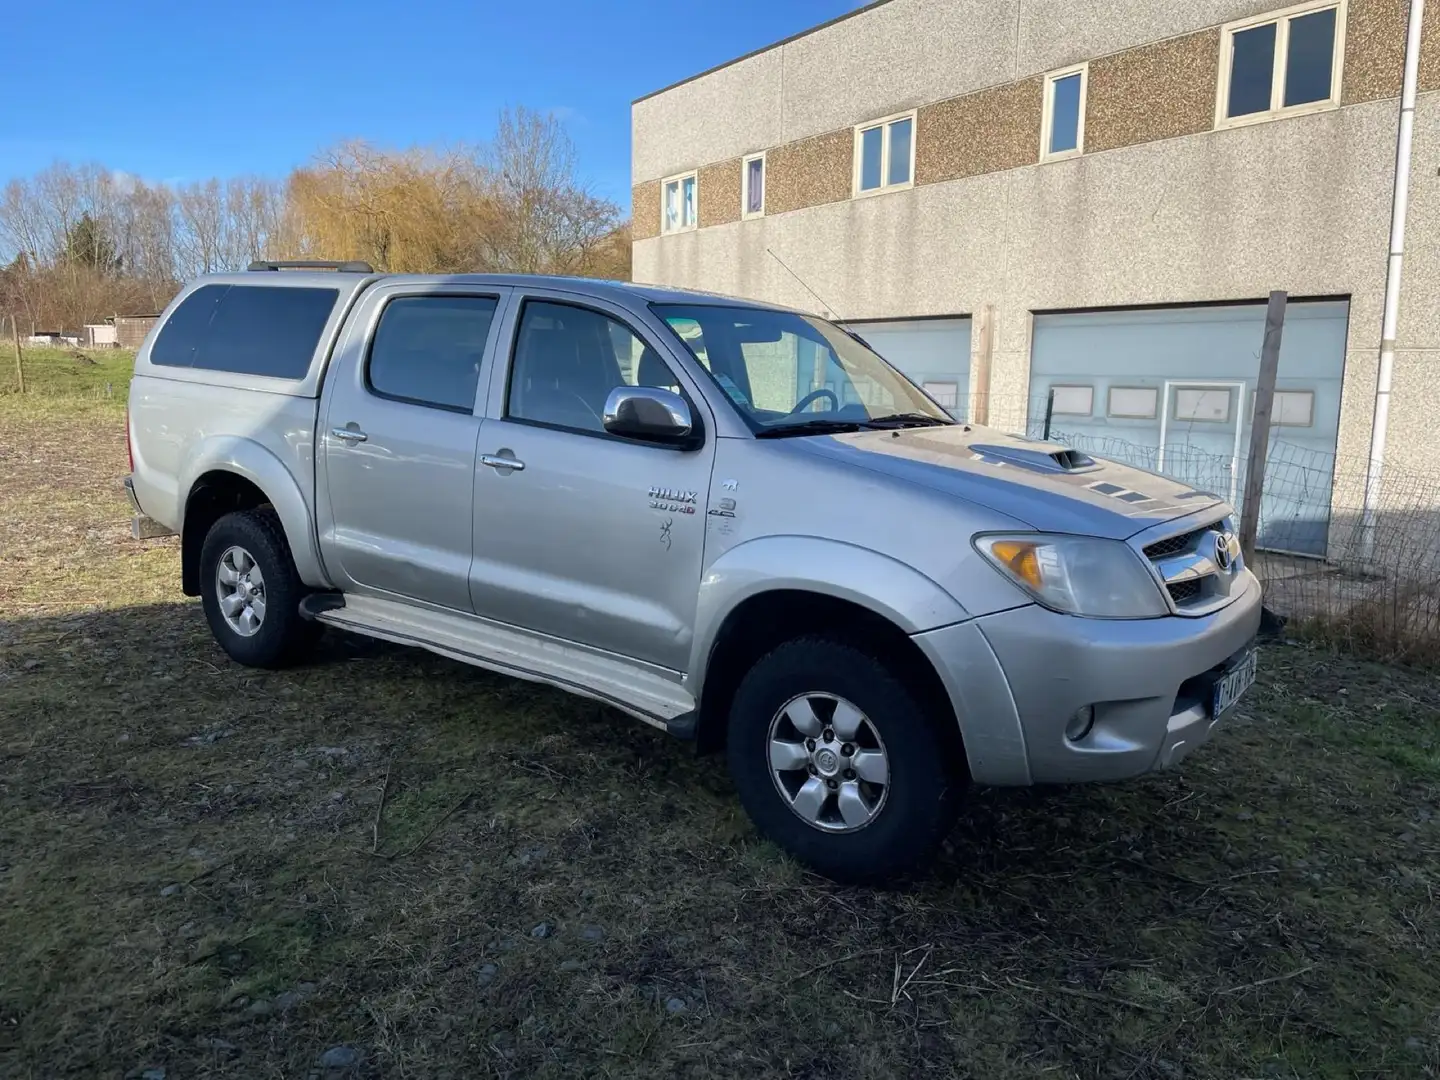 Toyota Hilux diesel boite automatic 3 litres climatise srebrna - 2